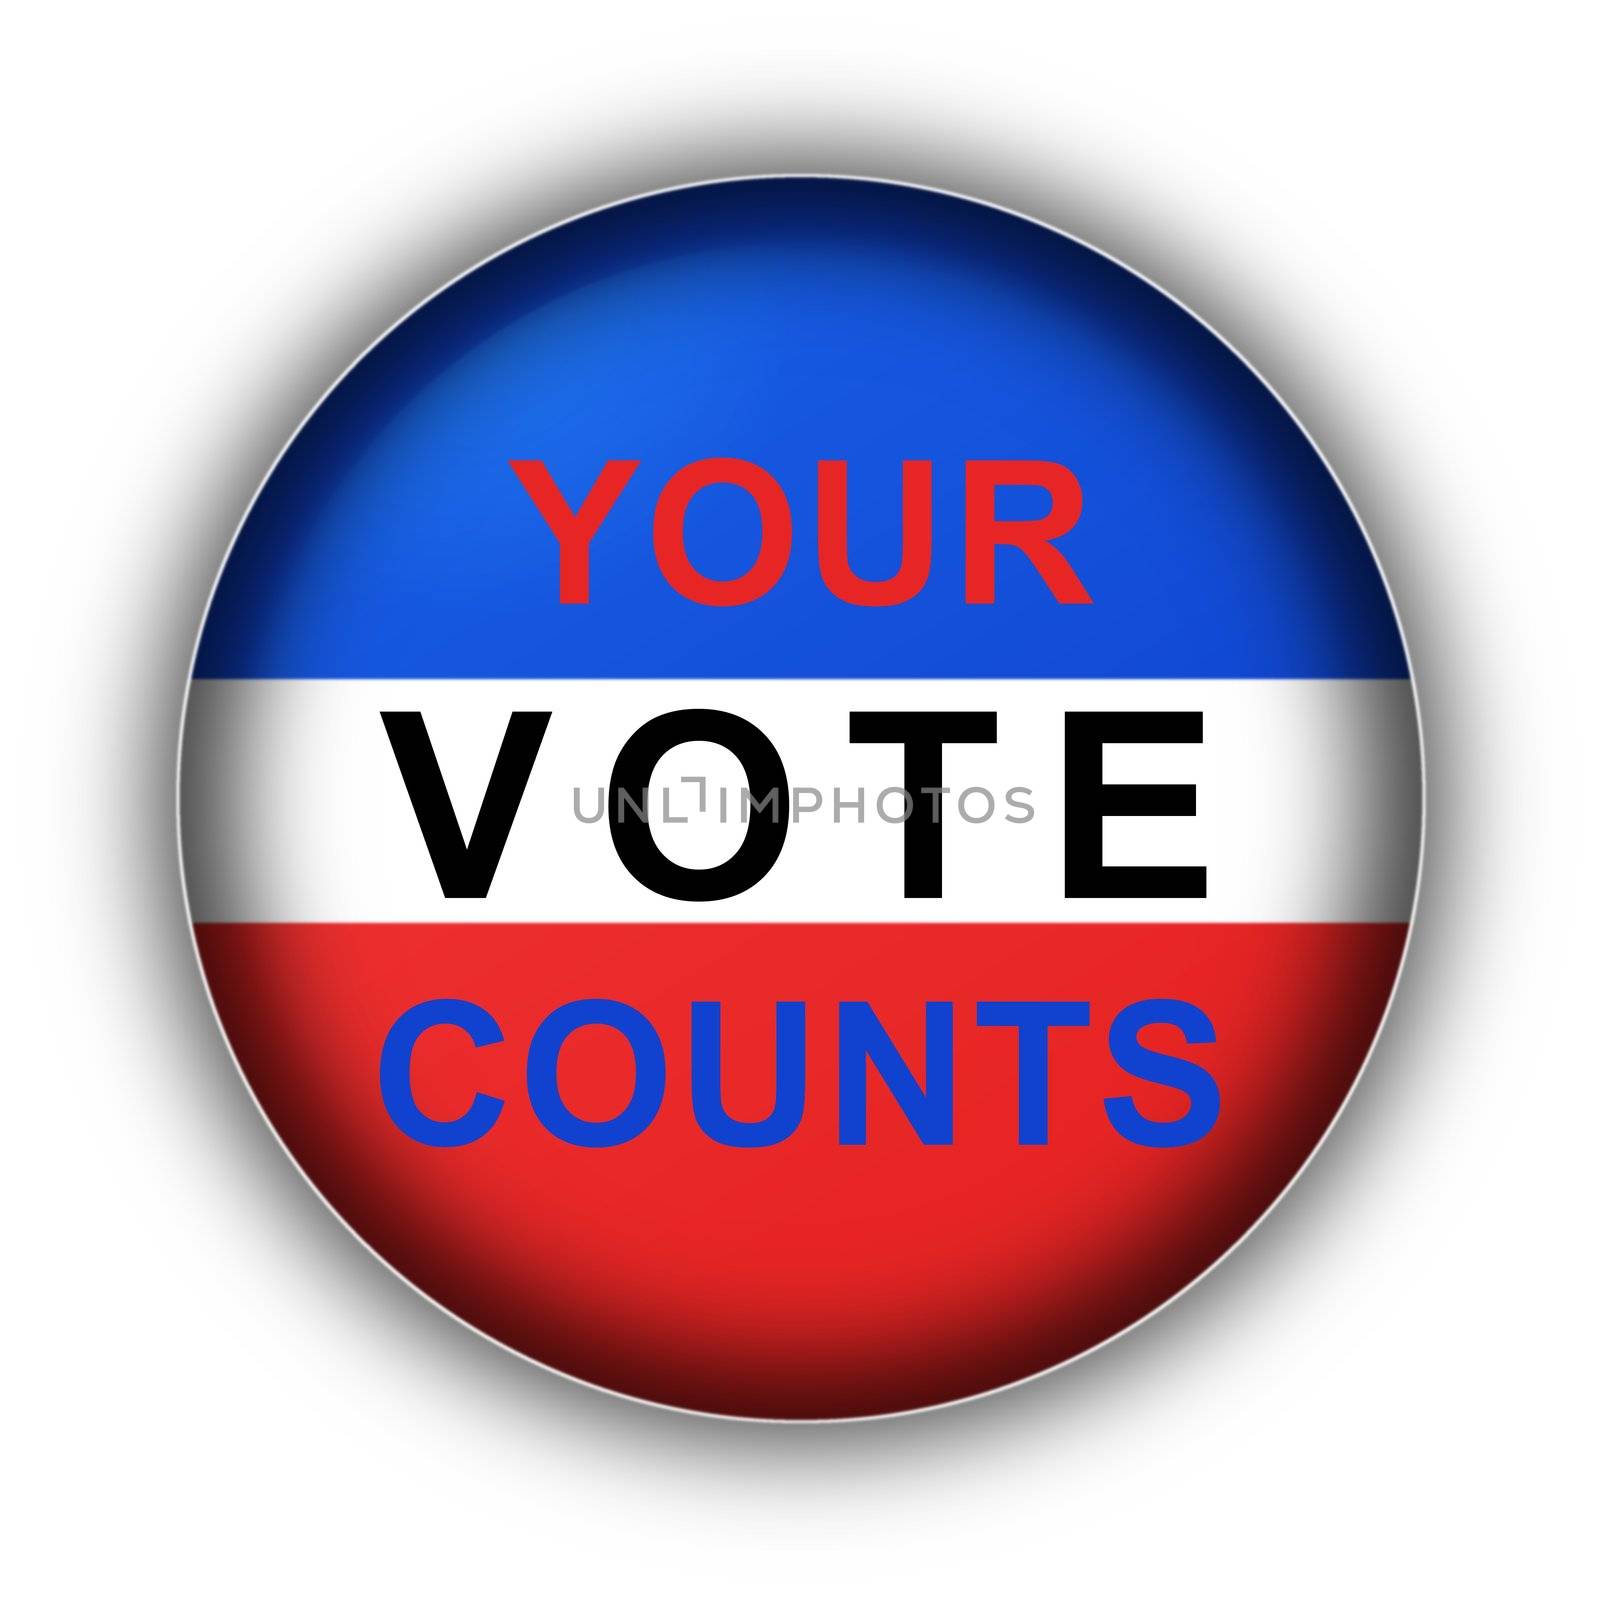 Your Vote Counts by hlehnerer